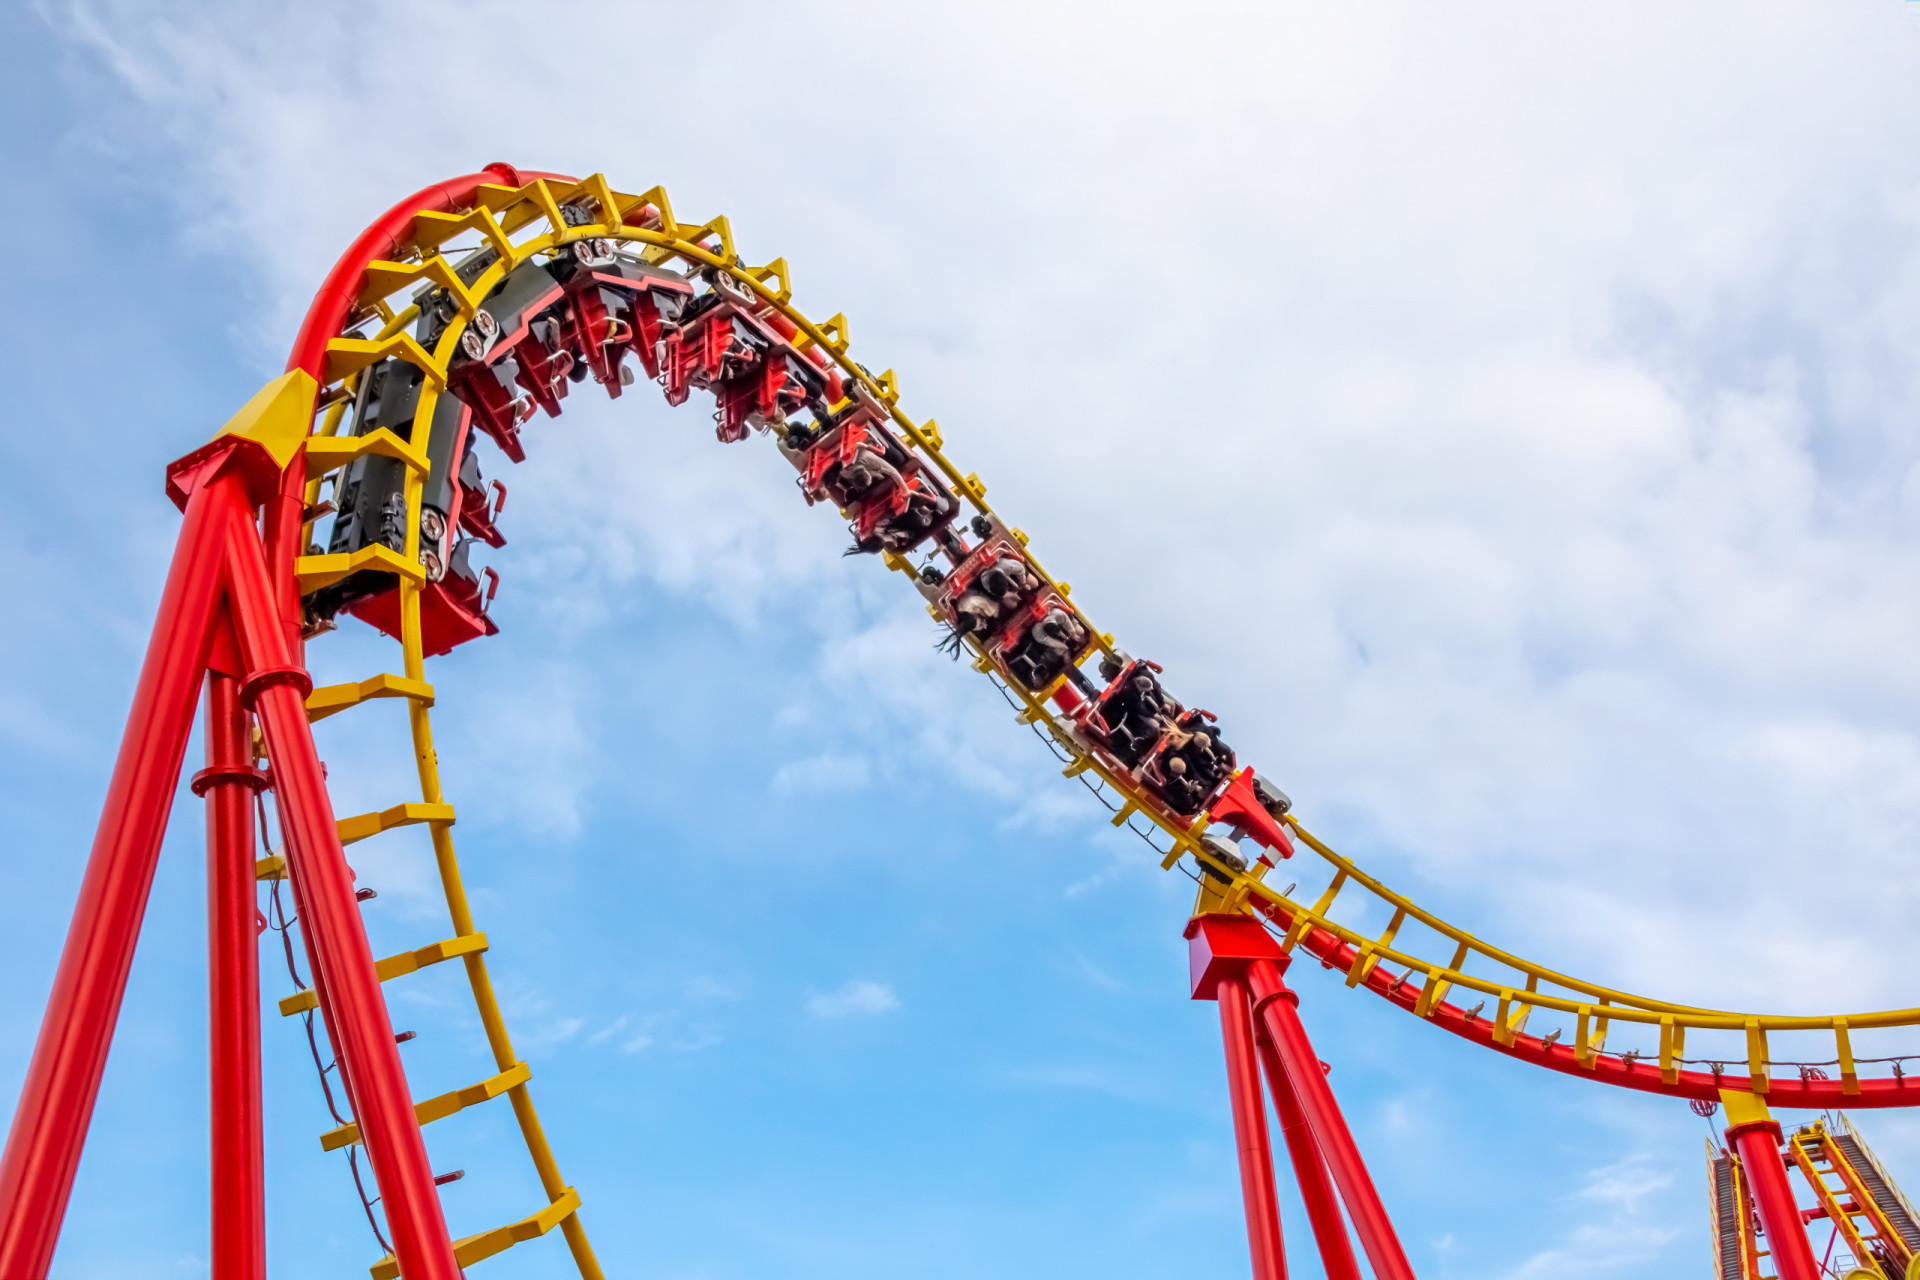 <p>Is your mom a thrill-seeker? A person who loves a good adventure? Take her to your nearest theme park, hop on a rollercoaster, and conquer gravity together!</p><p><a href="https://www.msn.com/en-us/community/channel/vid-7xx8mnucu55yw63we9va2gwr7uihbxwc68fxqp25x6tg4ftibpra?cvid=94631541bc0f4f89bfd59158d696ad7e">Follow us and access great exclusive content every day</a></p>